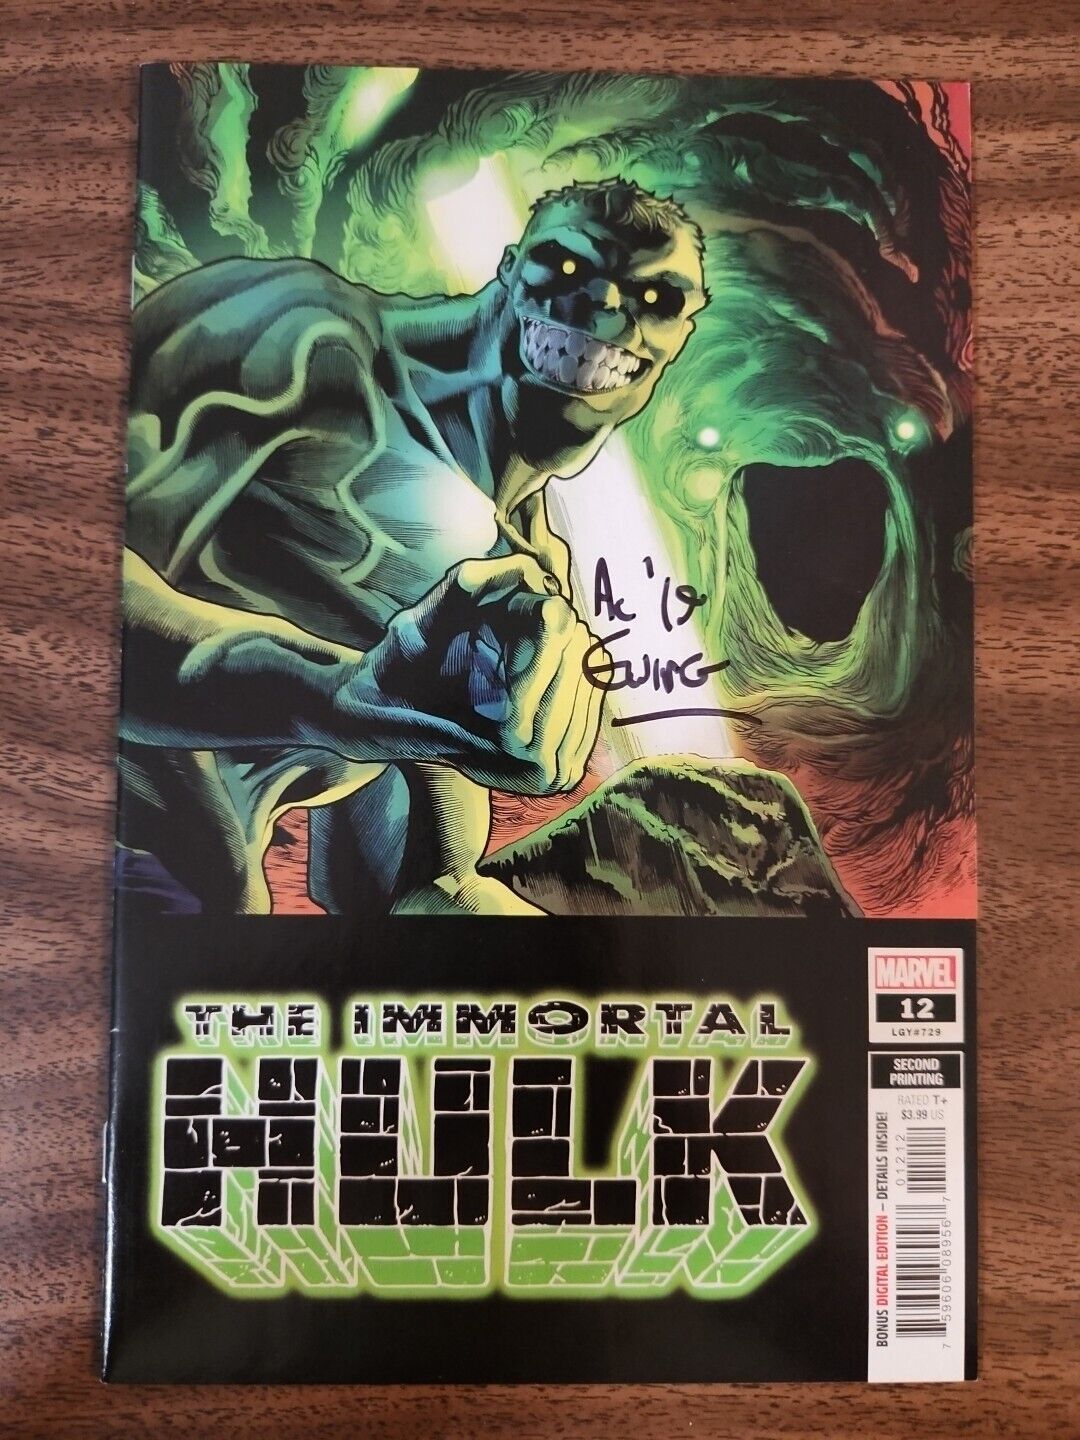 The Immortal Hulk #12 2nd Print Cover Auto By AL Ewing 1st One Below All